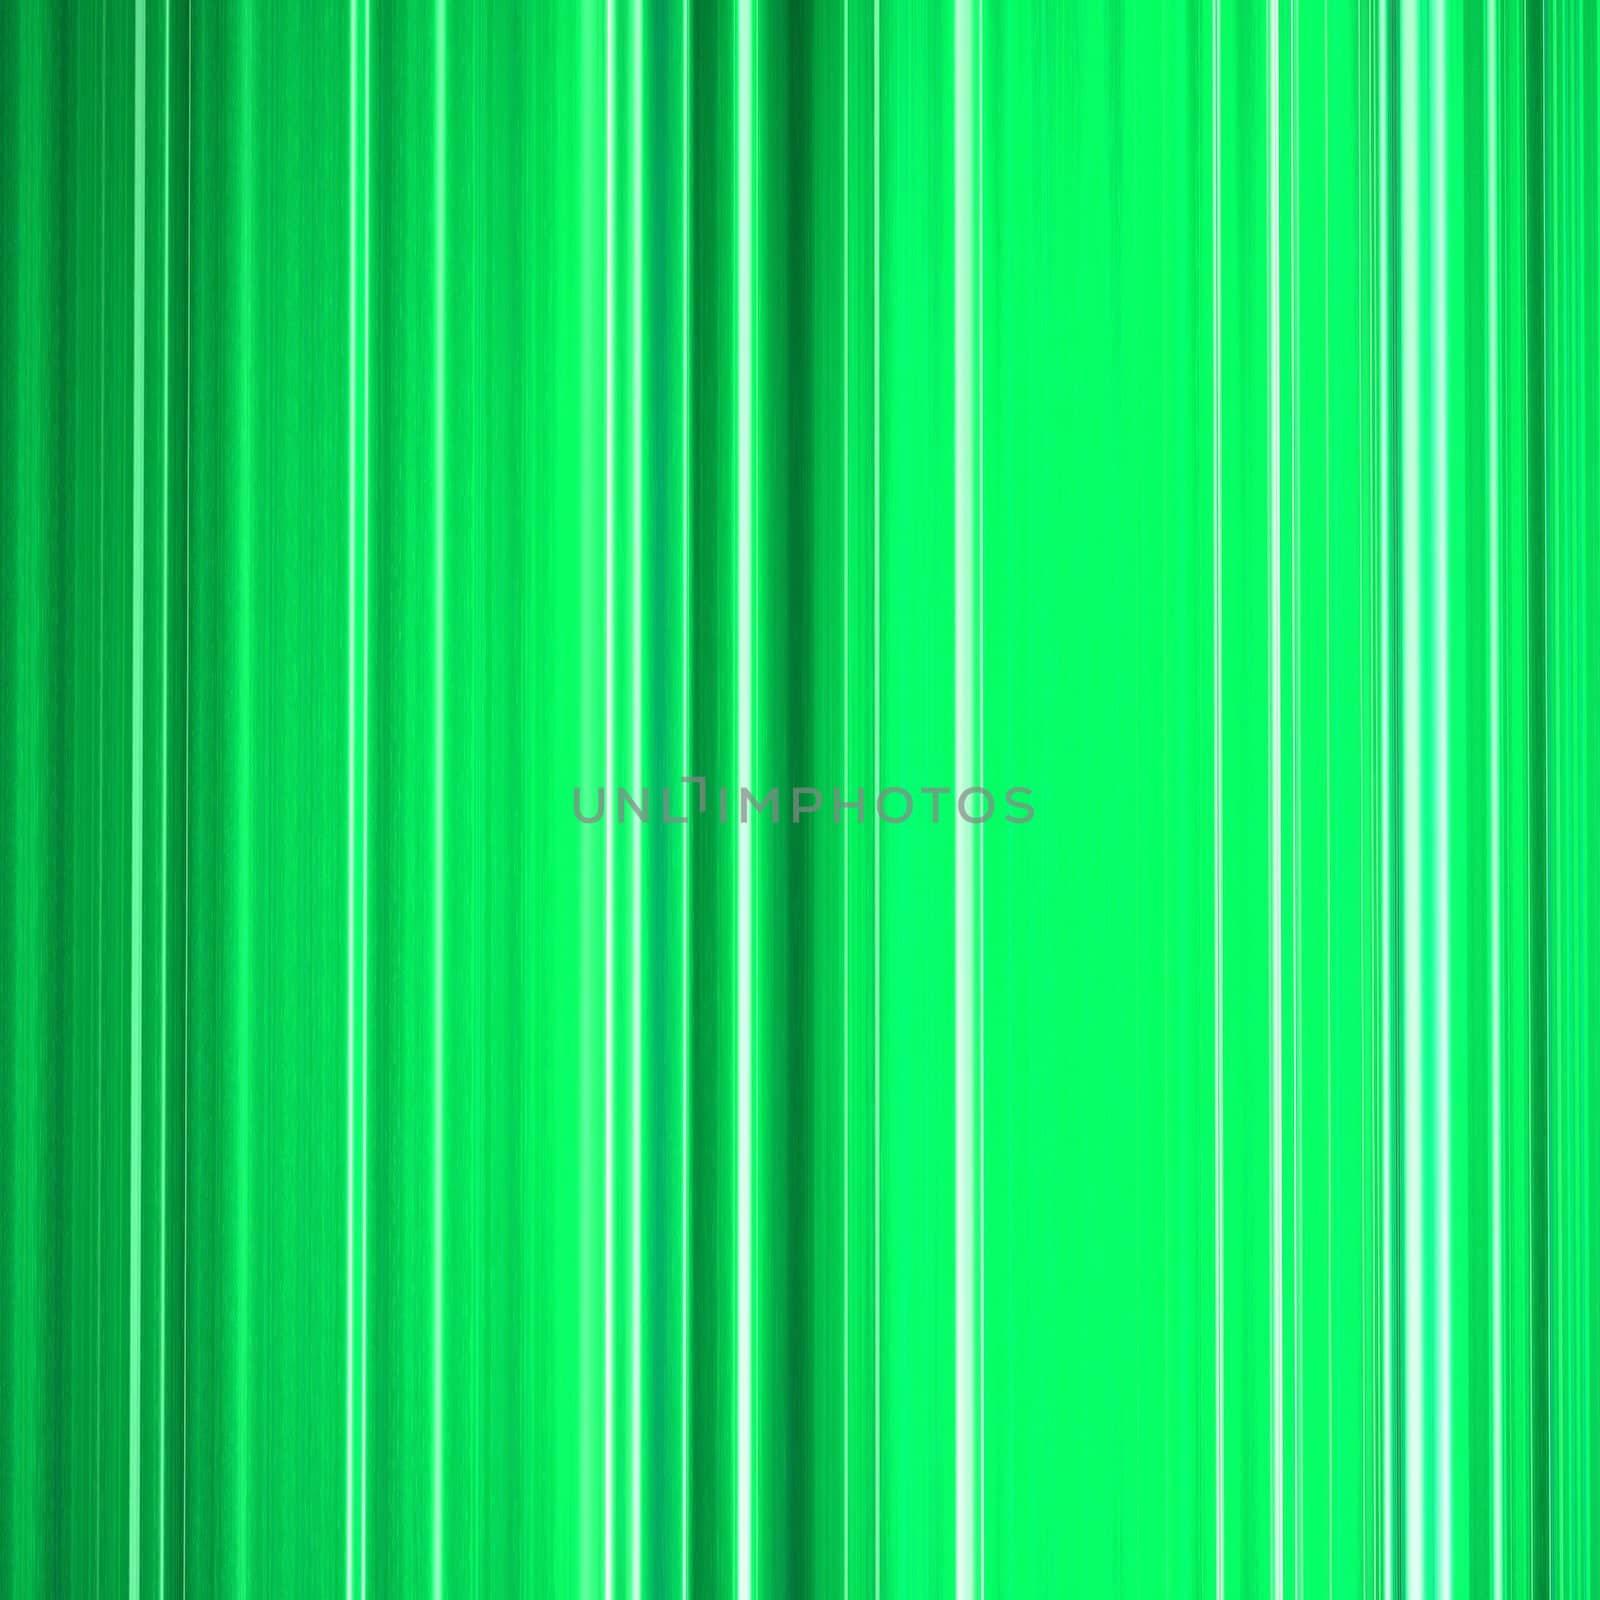 A background illustration of green vertical lines.